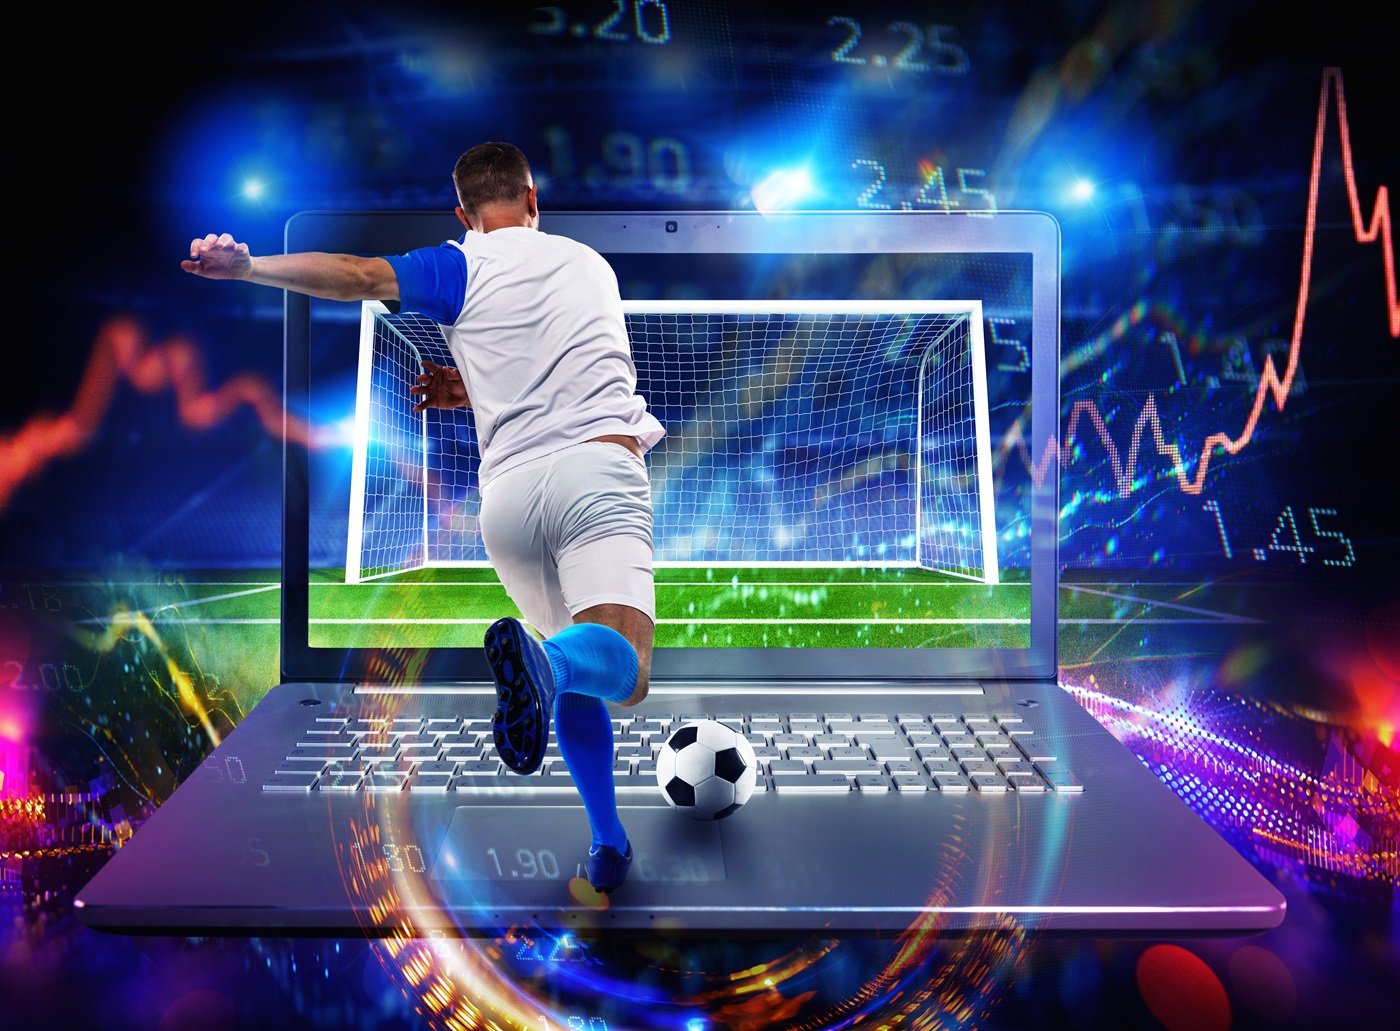 All You Need to Know About Sport Analytics in 2023